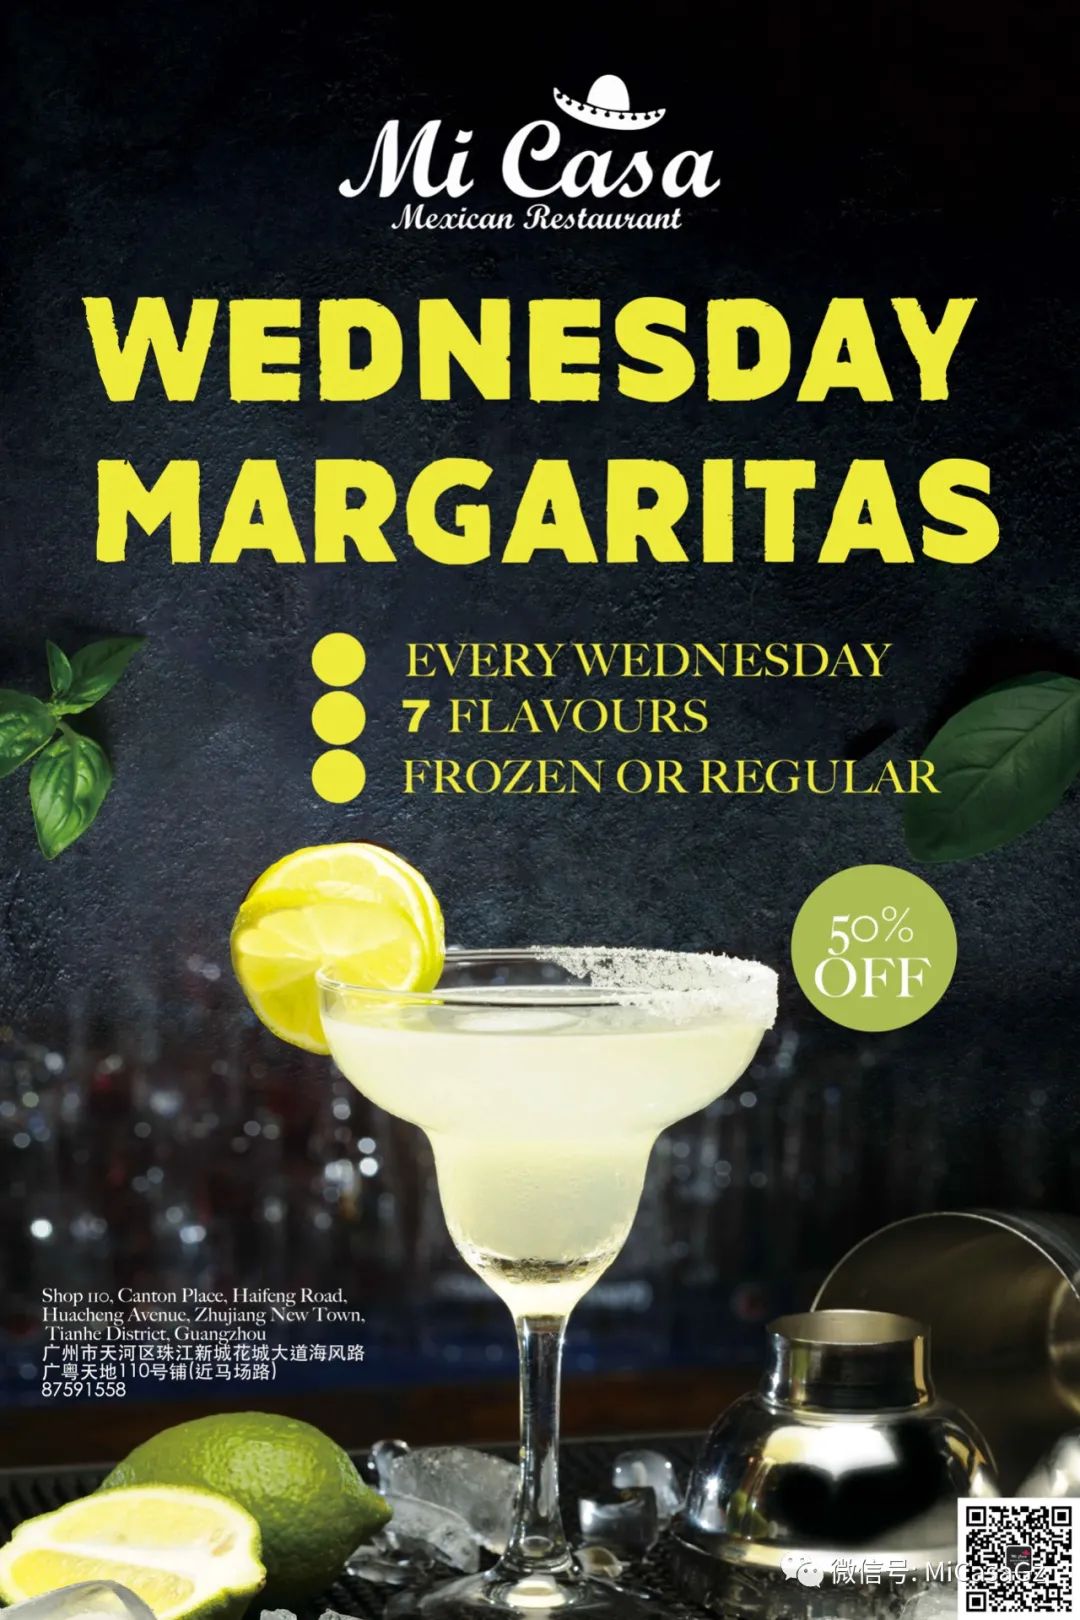 Every-Wednesday-get-your-Margaritas-for-50-OFF-.jpeg